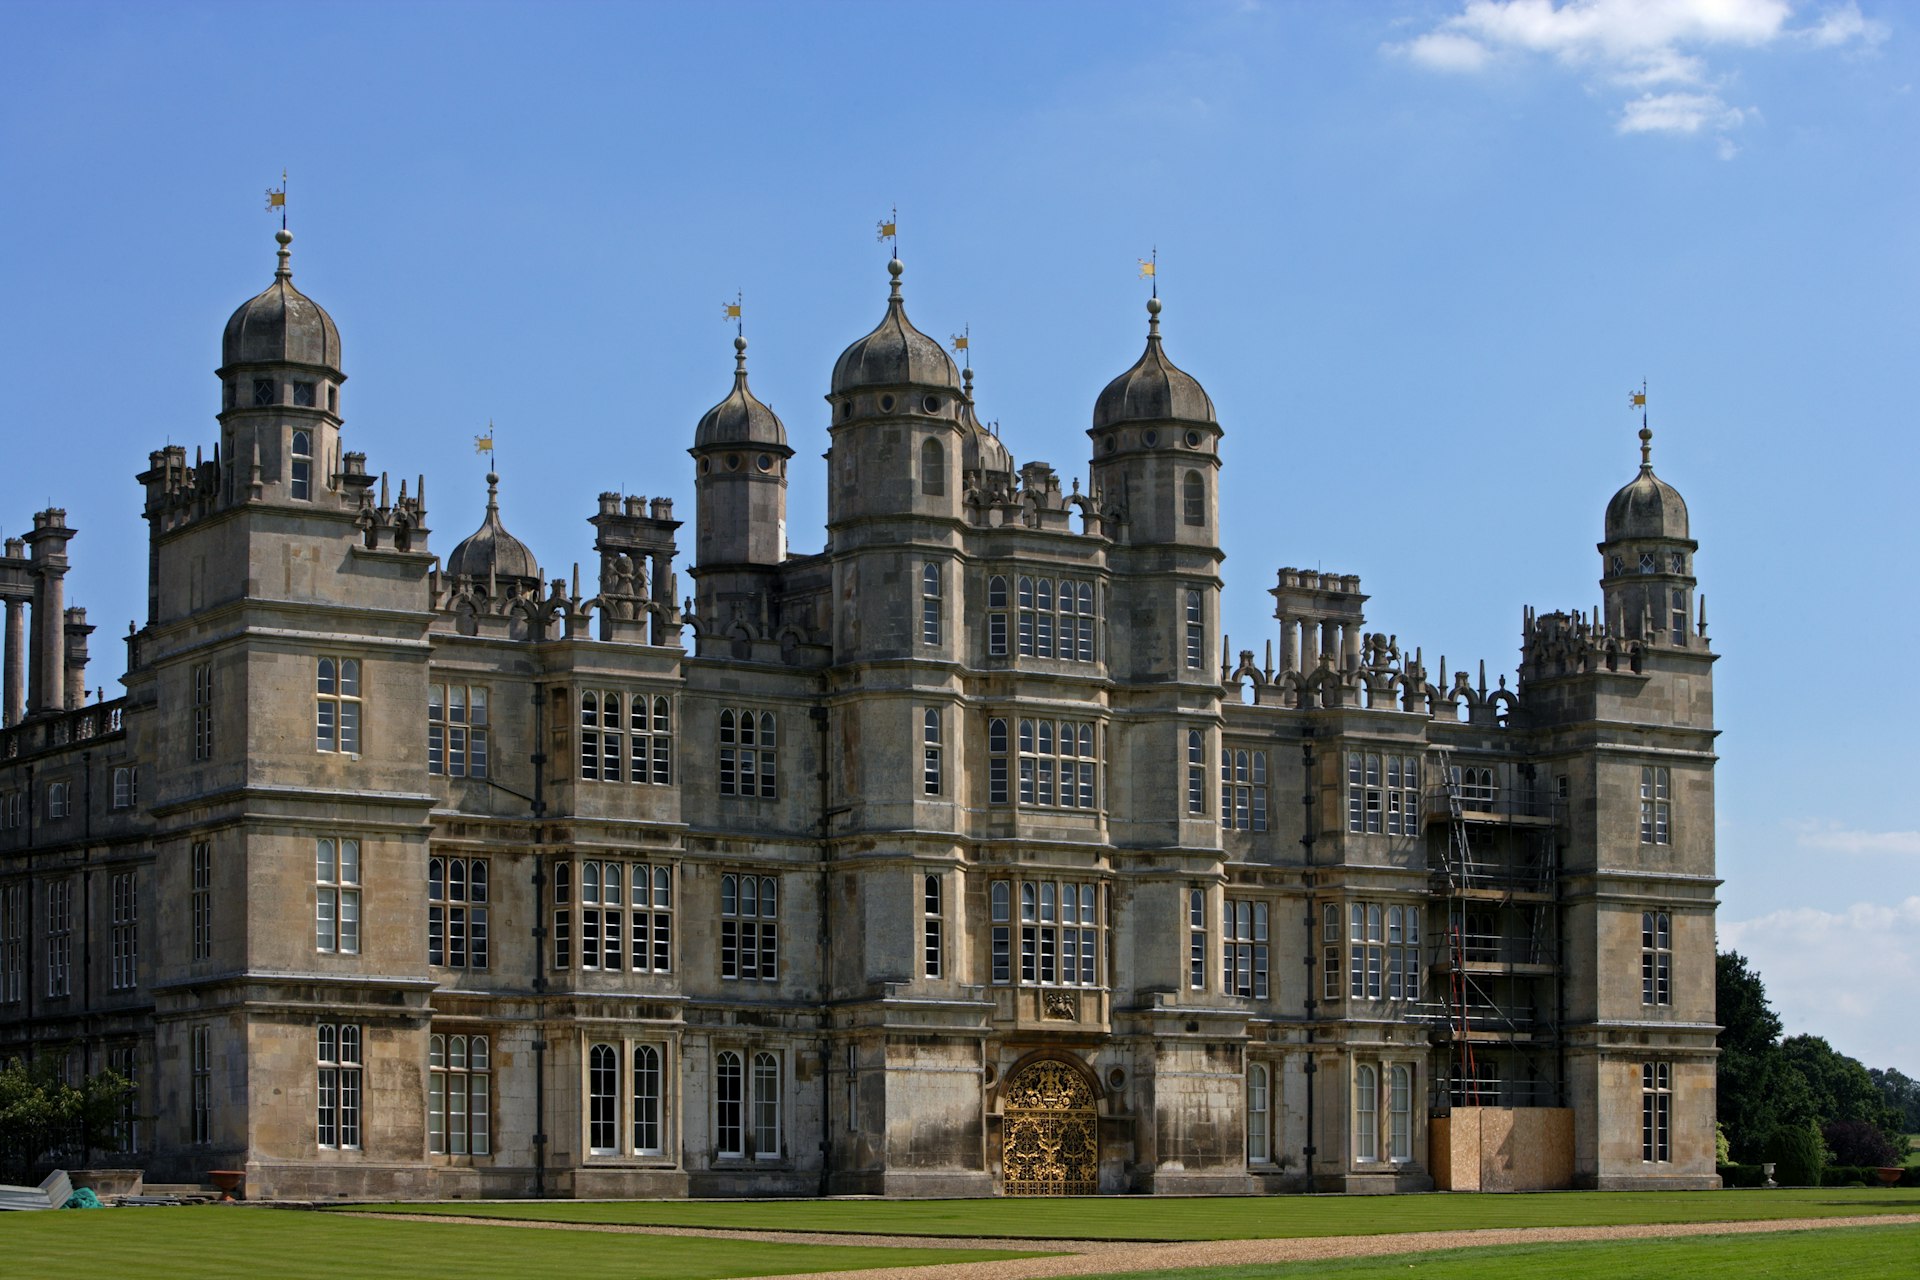 West facade of Burghley House (16th century), Elizabethan style, Built by William Cecil, Stamford, Lincolnshire, United Kingdom